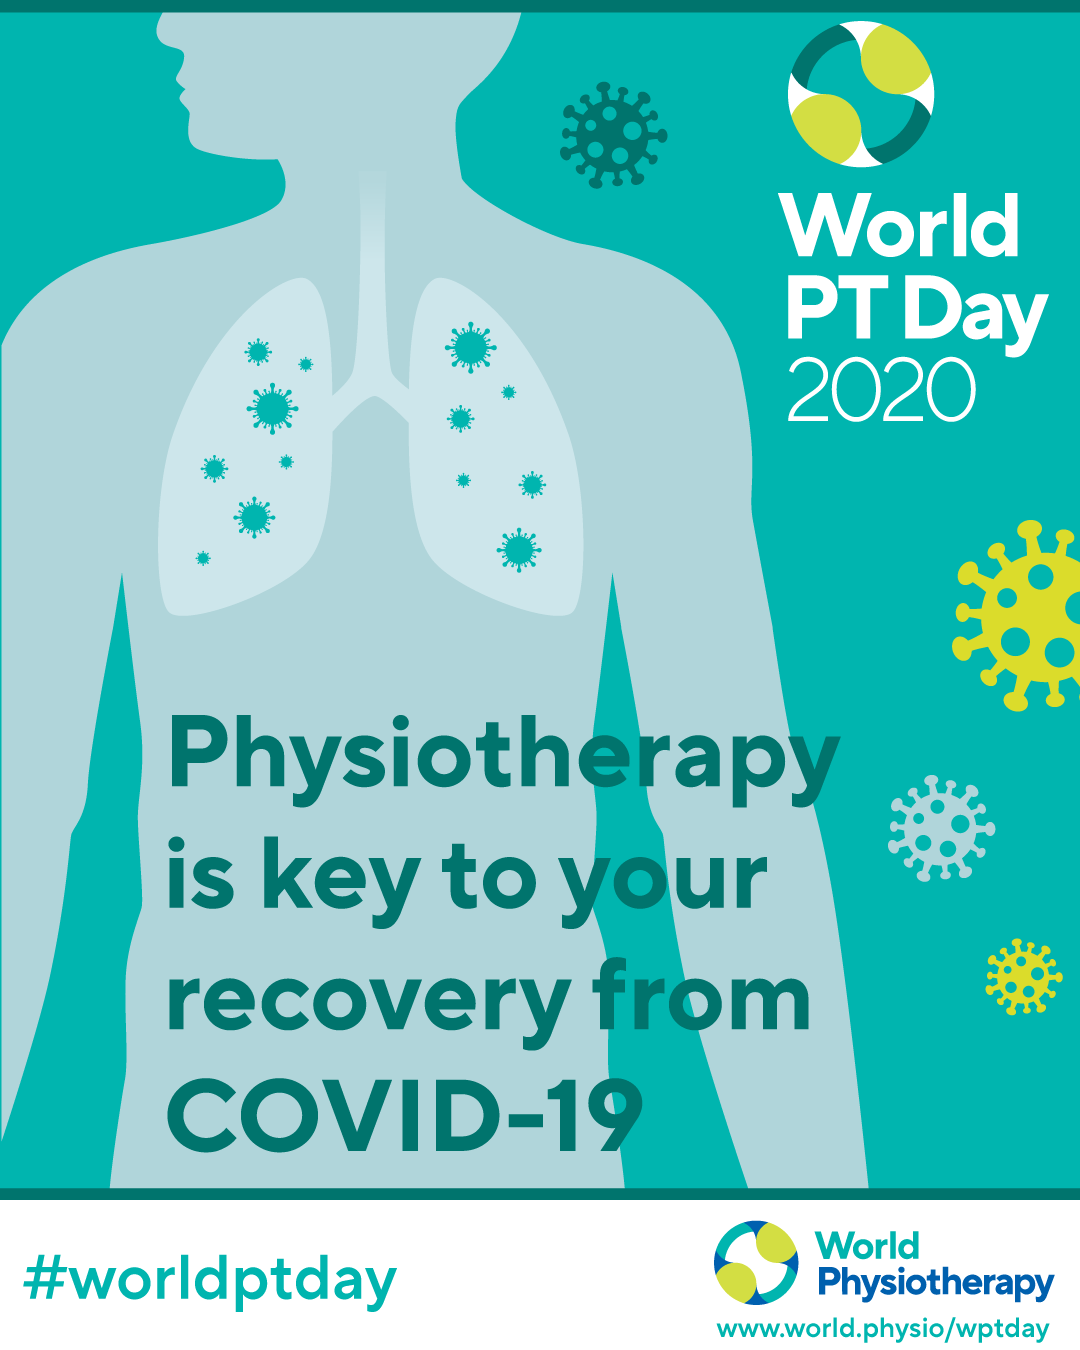 World PT Day 2020: social media | World Physiotherapy